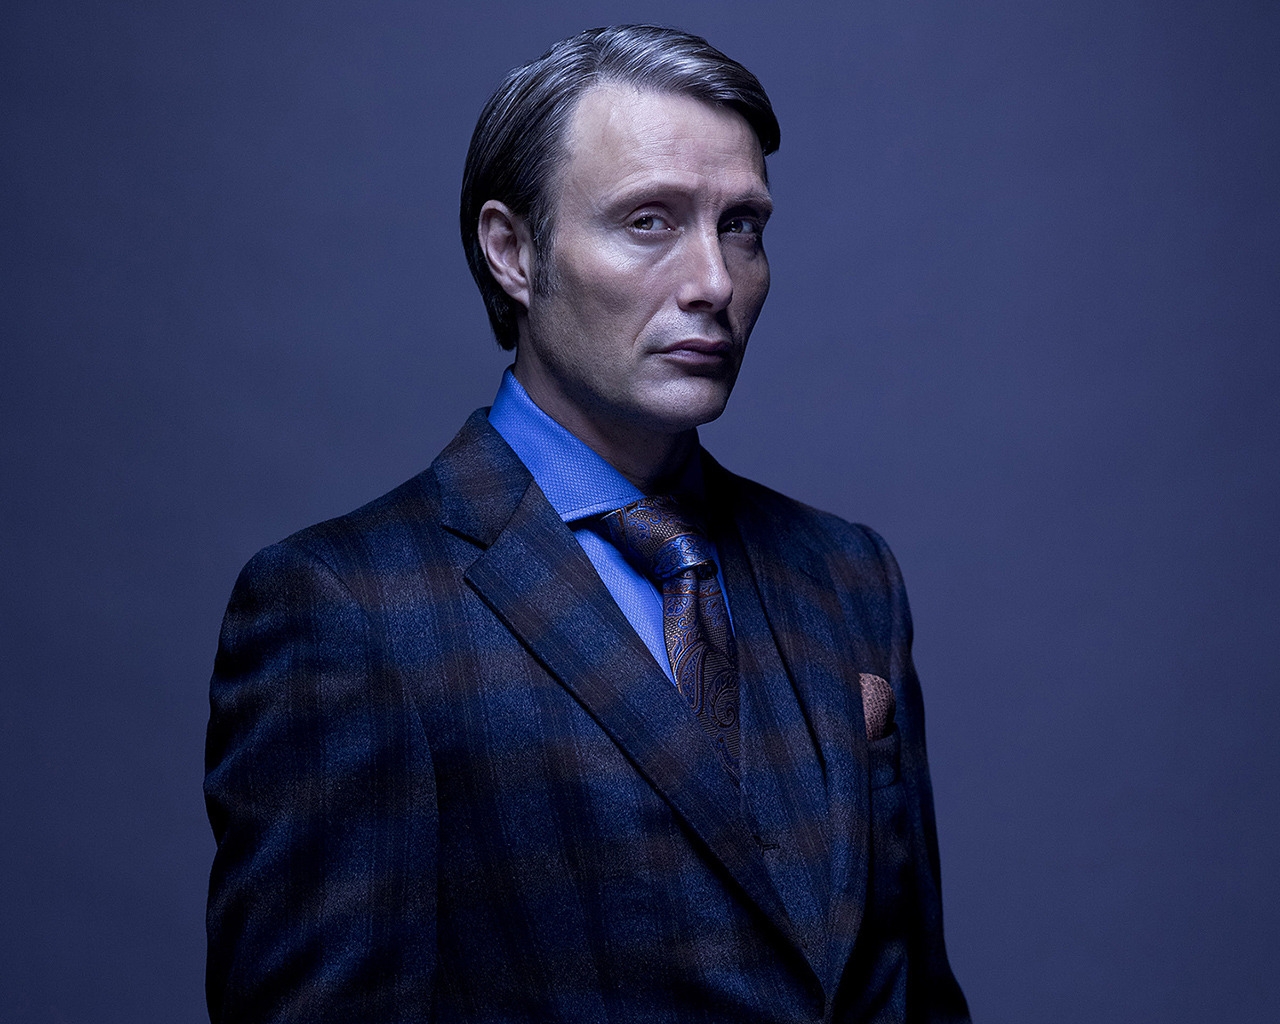 Hannibal Lecter for 1280 x 1024 resolution